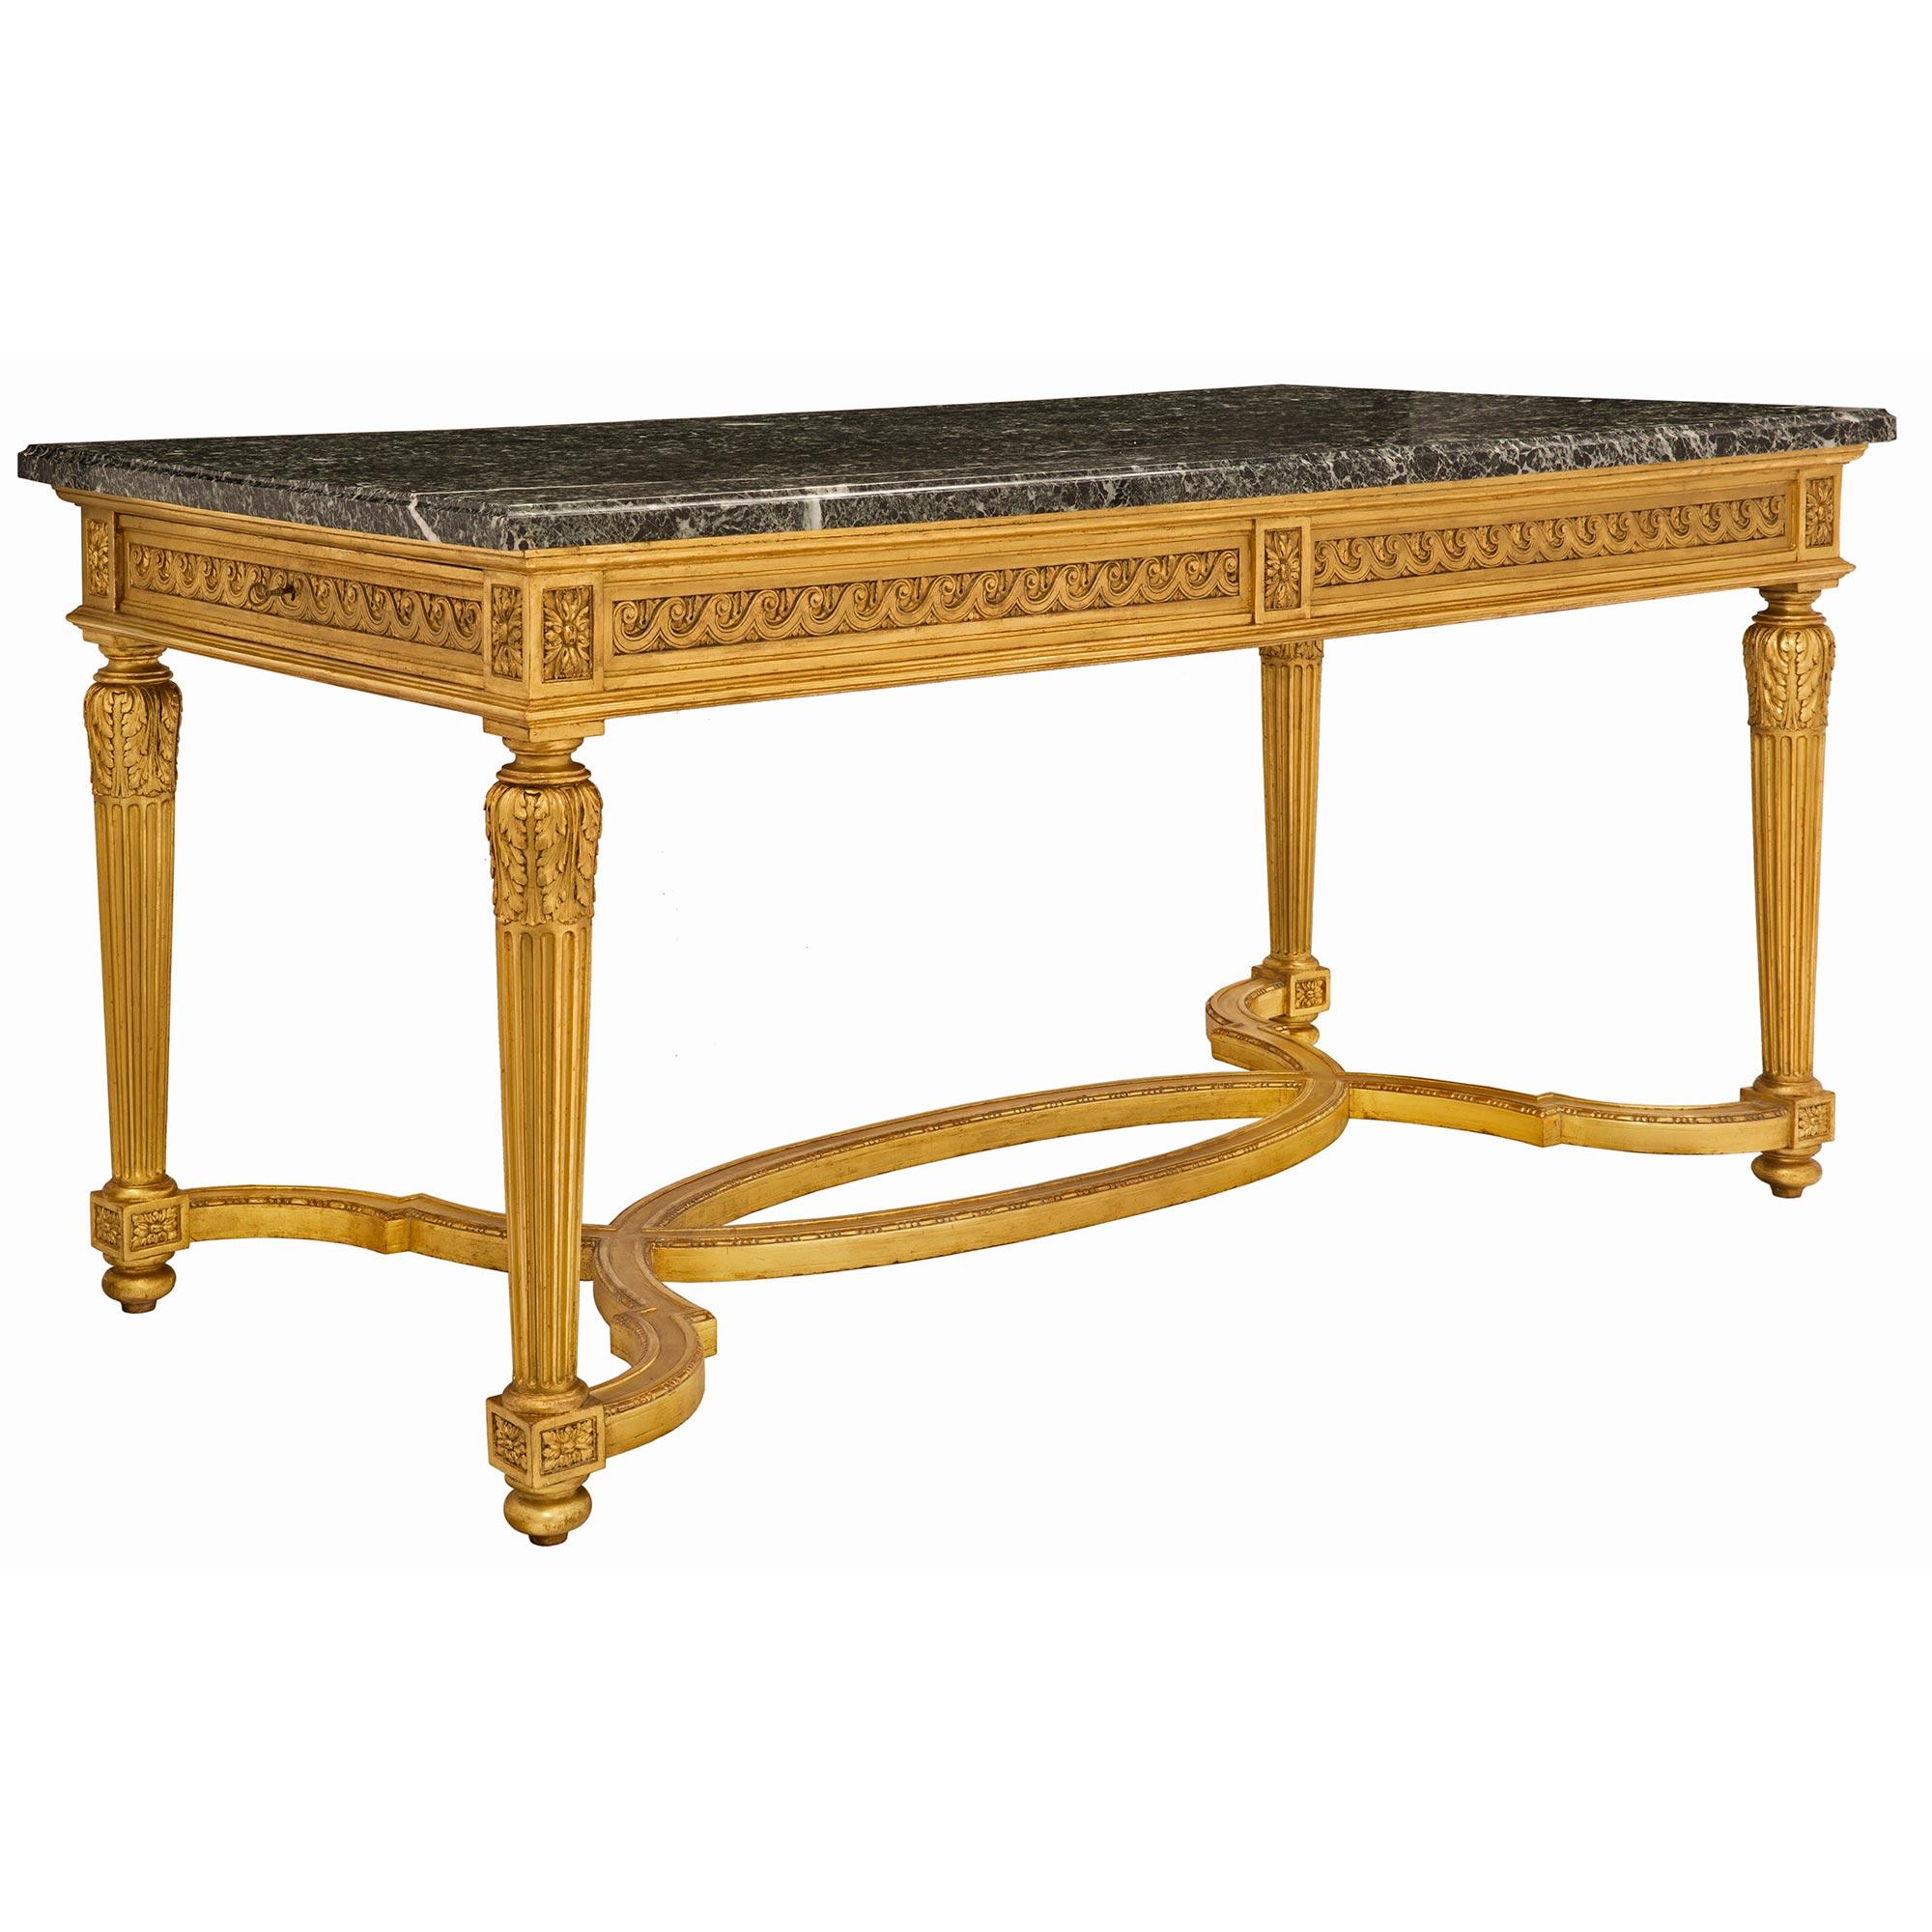 19th Century Louis XVI Style Giltwood and Vert Antique Marble Center Table In Good Condition For Sale In West Palm Beach, FL